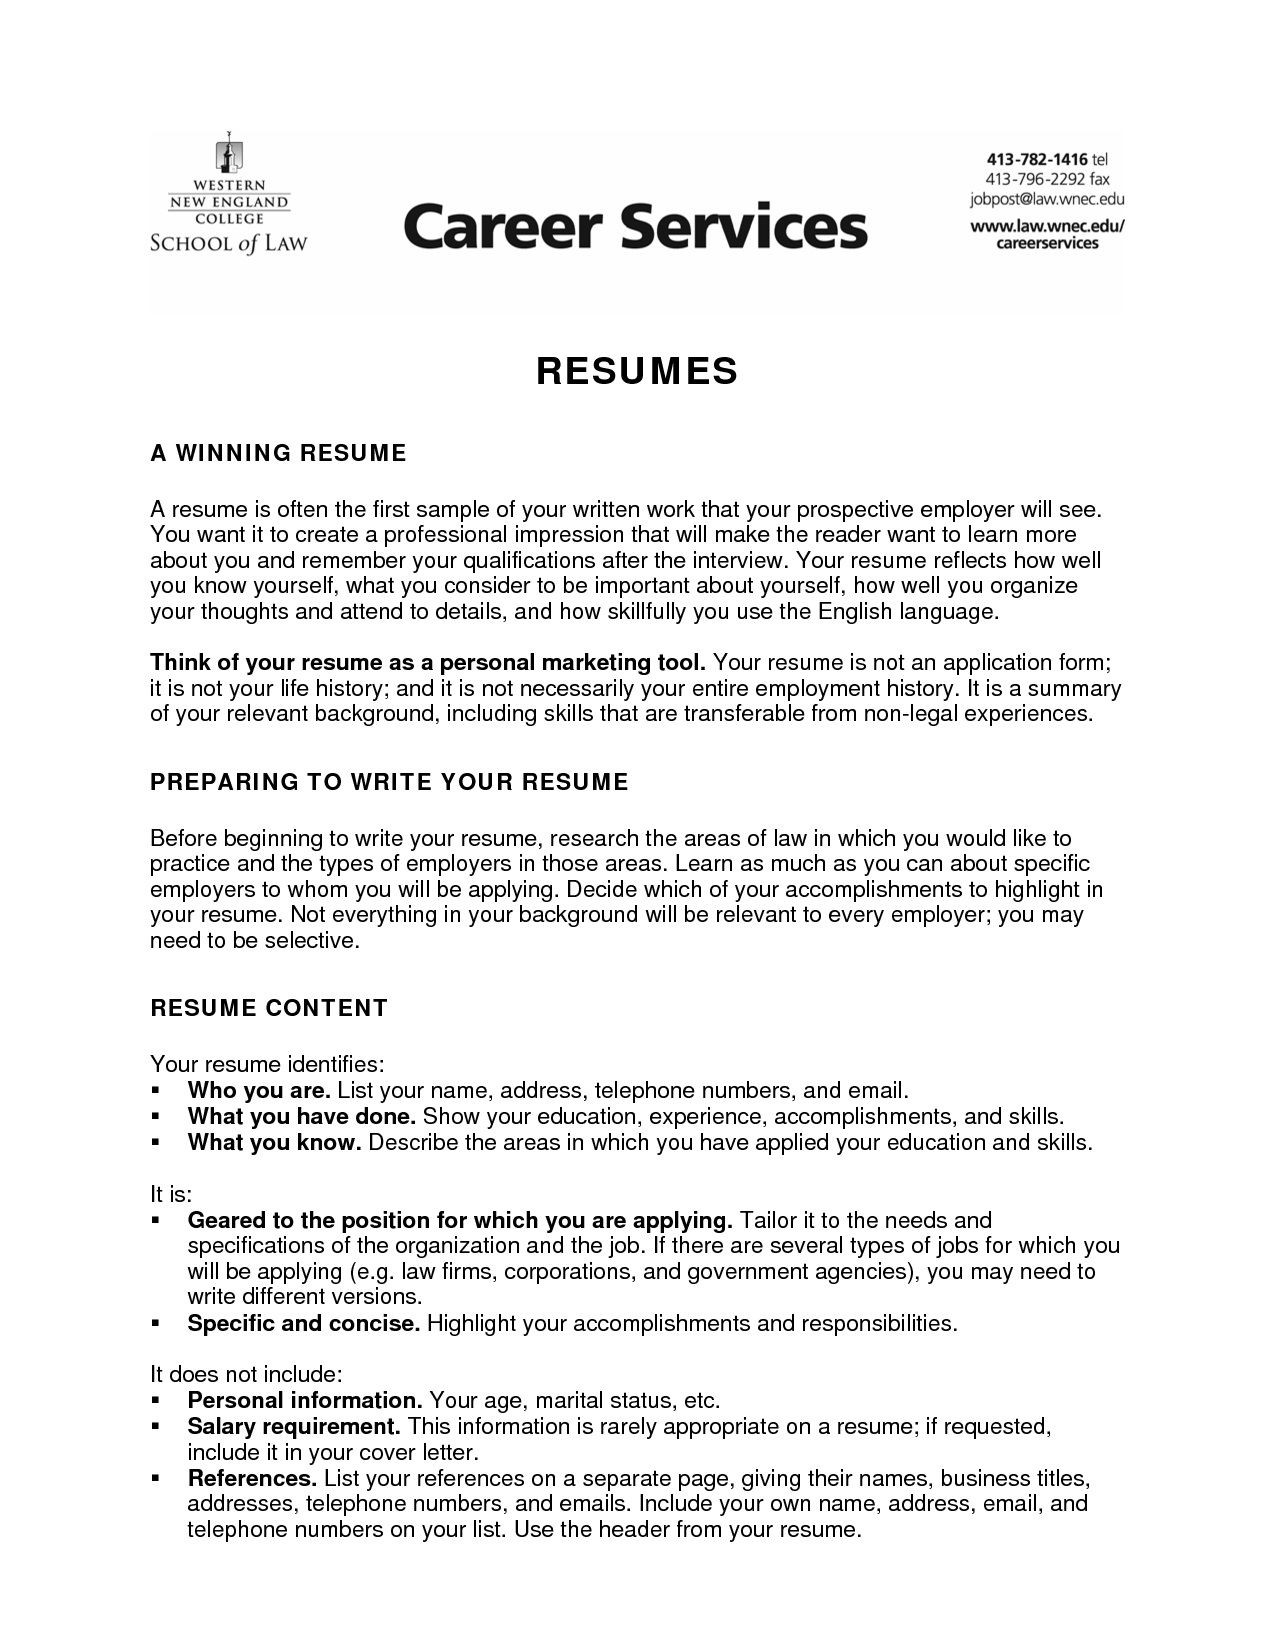 Resume Objective Samples for College Students God Objective for Resume Colege Student